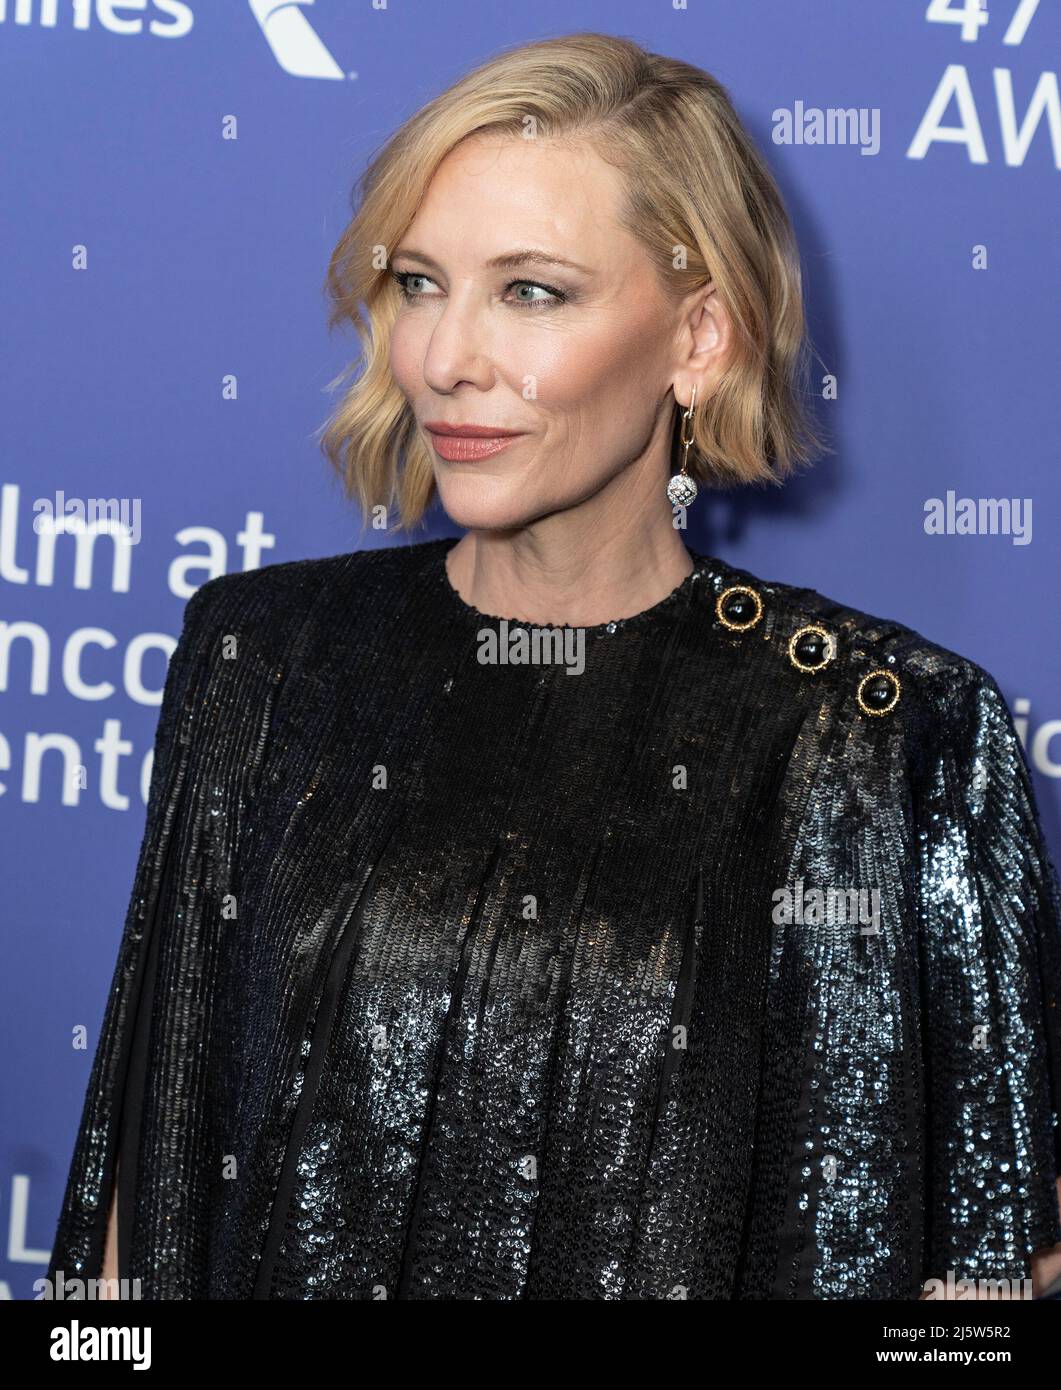 April 25, 2022, New York, New York, United States: Cate Blanchett wearing  dress by Nicolas Ghesquiere for Louis Vuitton attends 47th Chaplin Award  Gala at Alice Tully Hall (Credit Image: © Lev